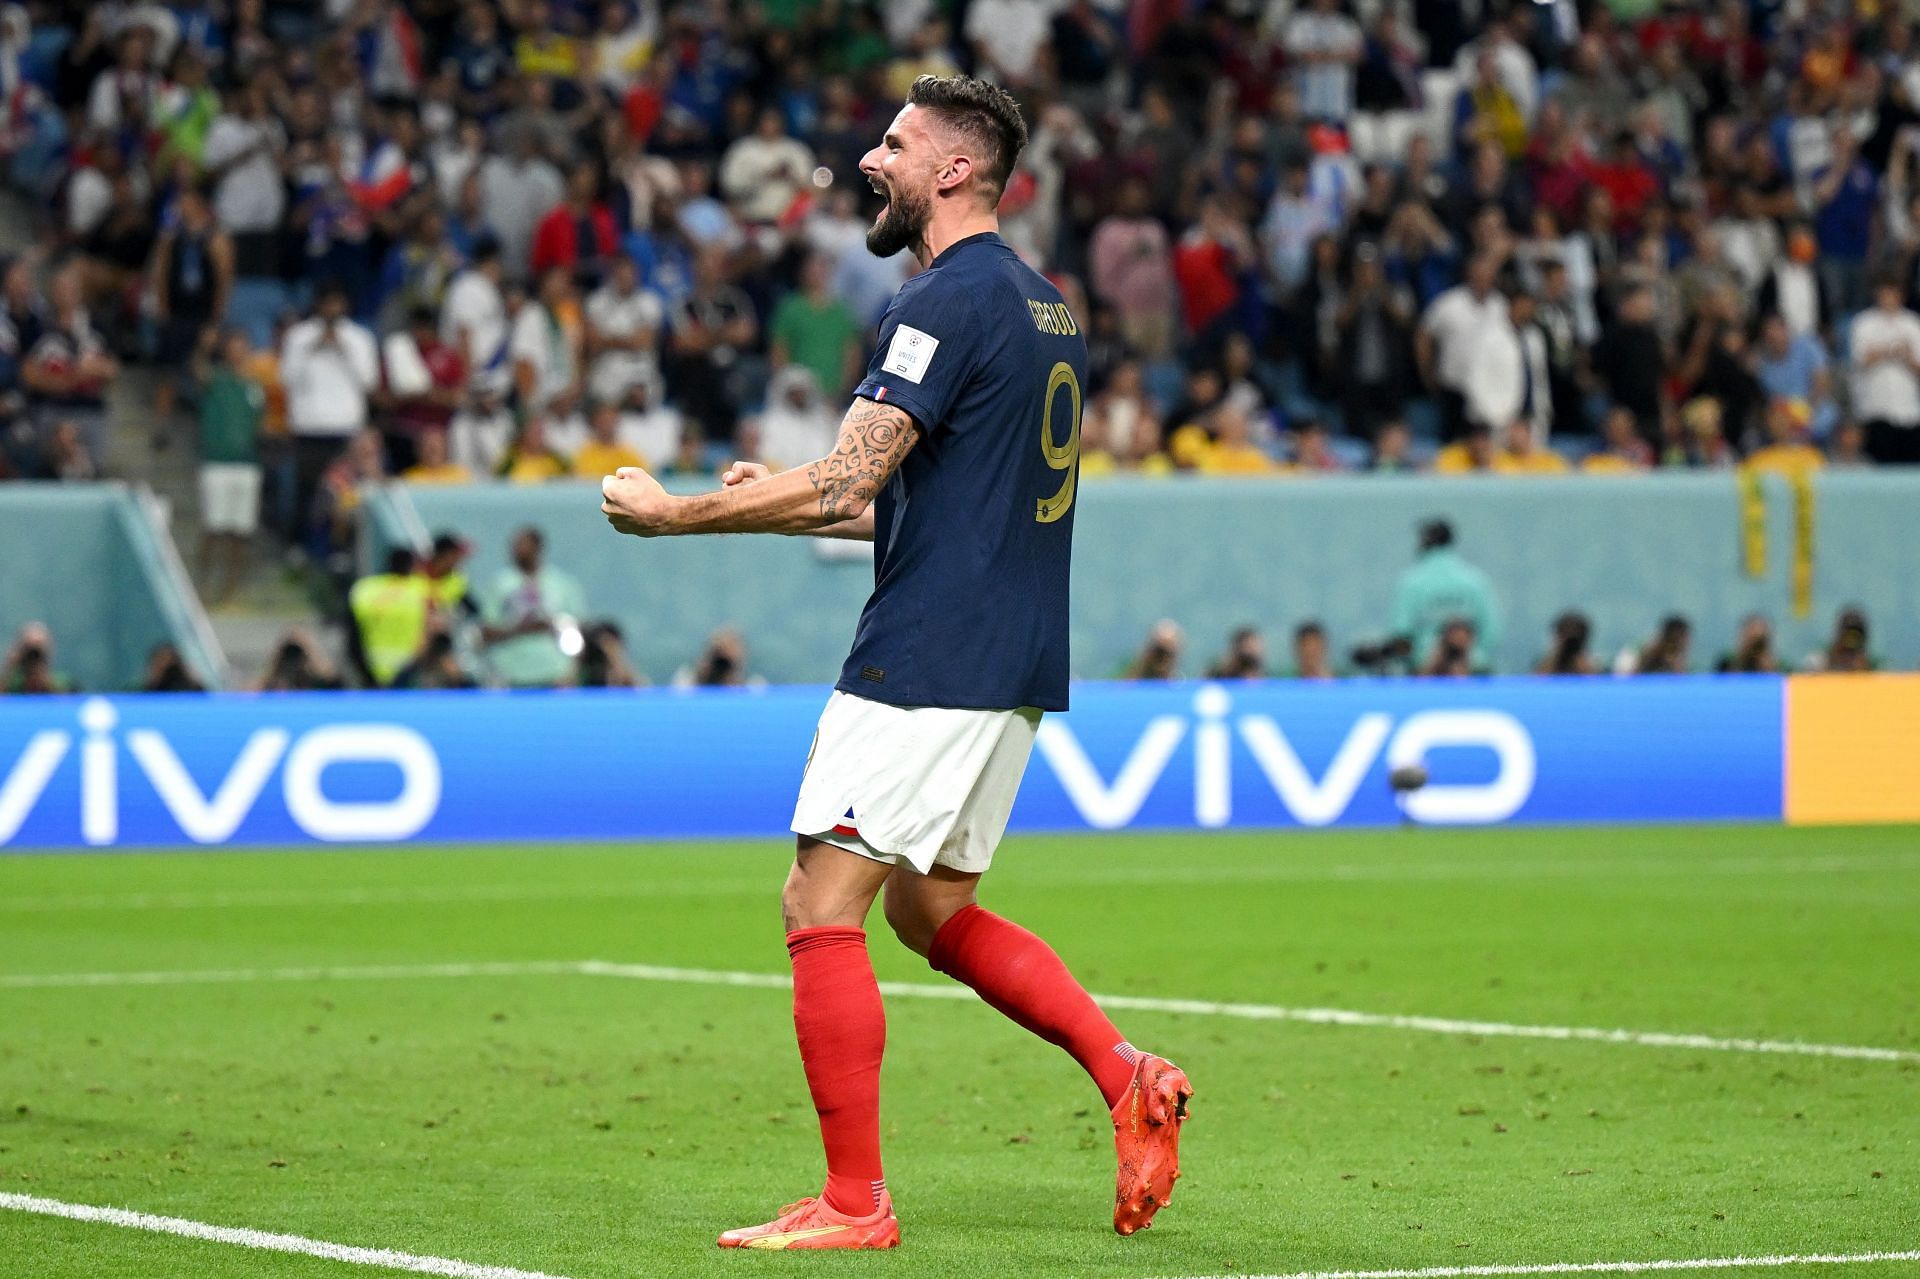 Giroud&#039;s brace puts him tied for first place in France&#039;s list of all-time international goalscorers.